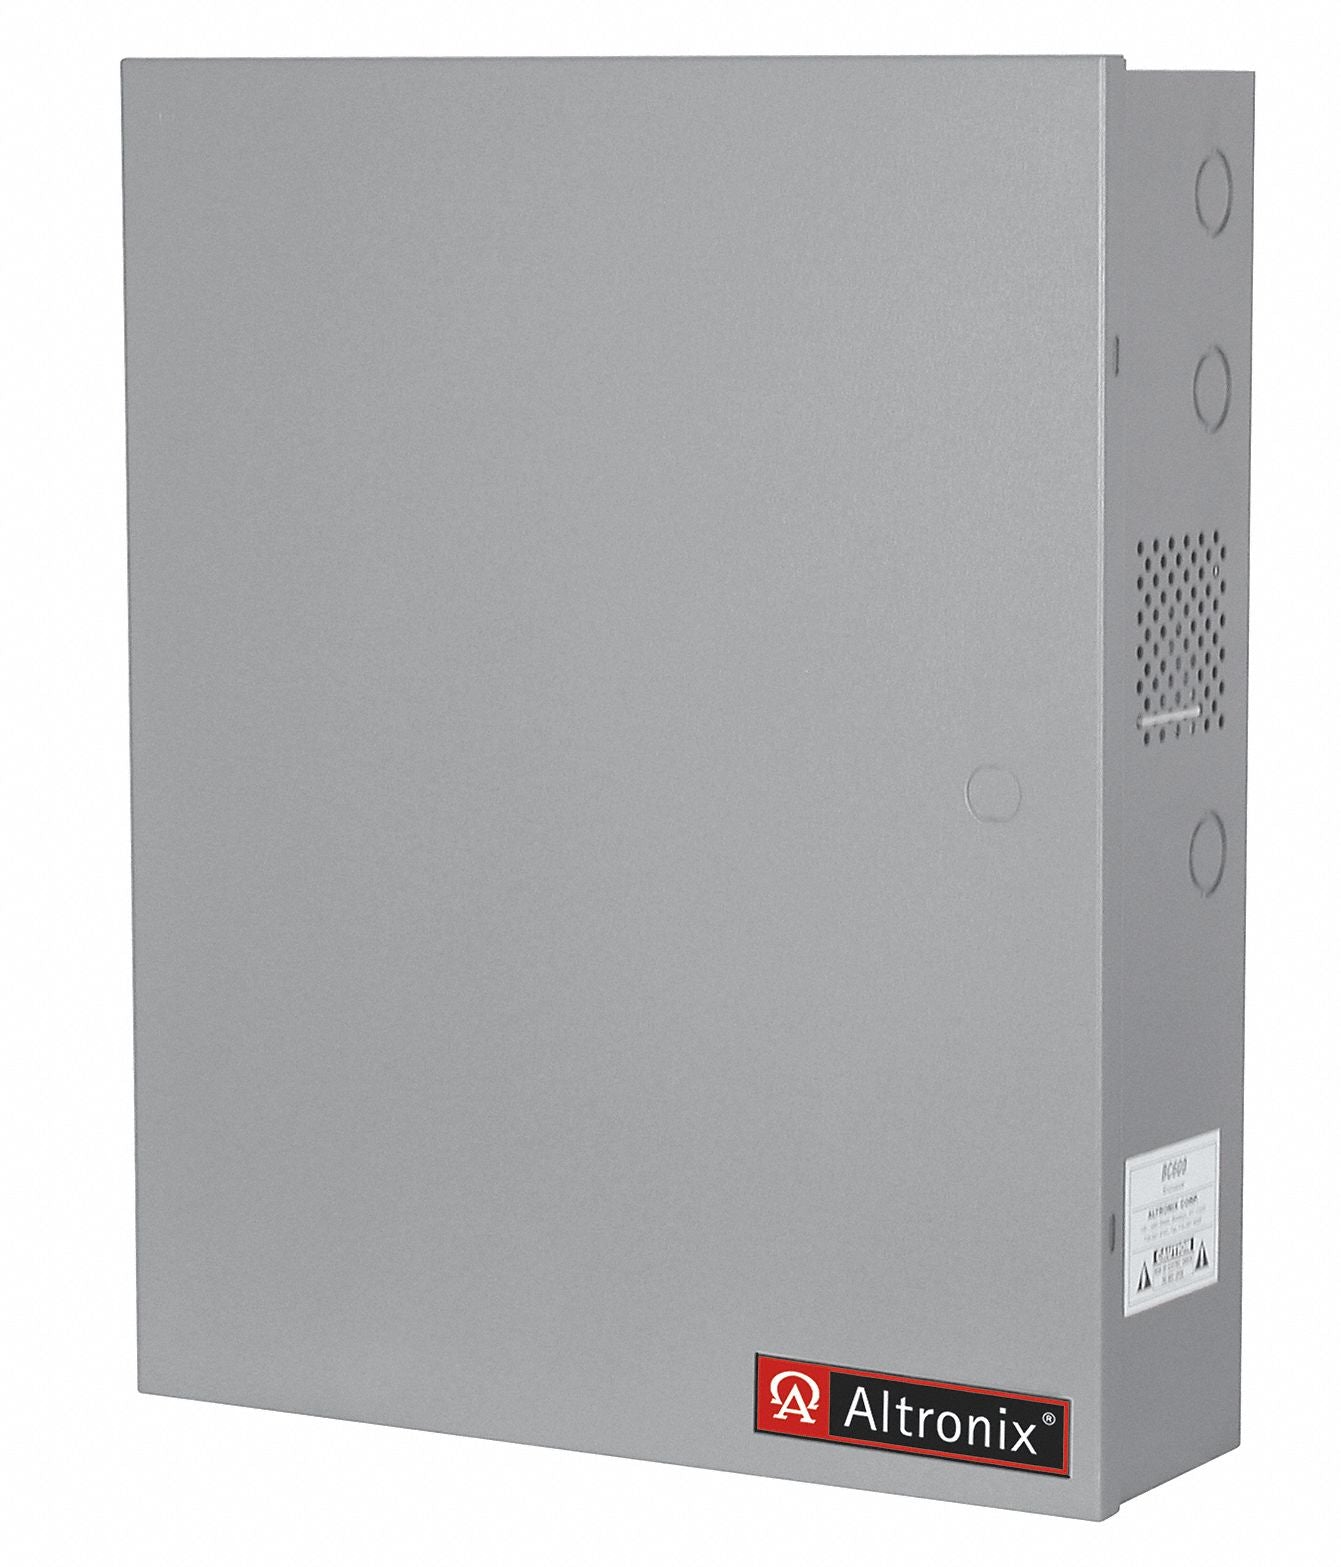 ALTRONIX AL1012ULACMJ Steel Power Supply/Charger with Gray Finish